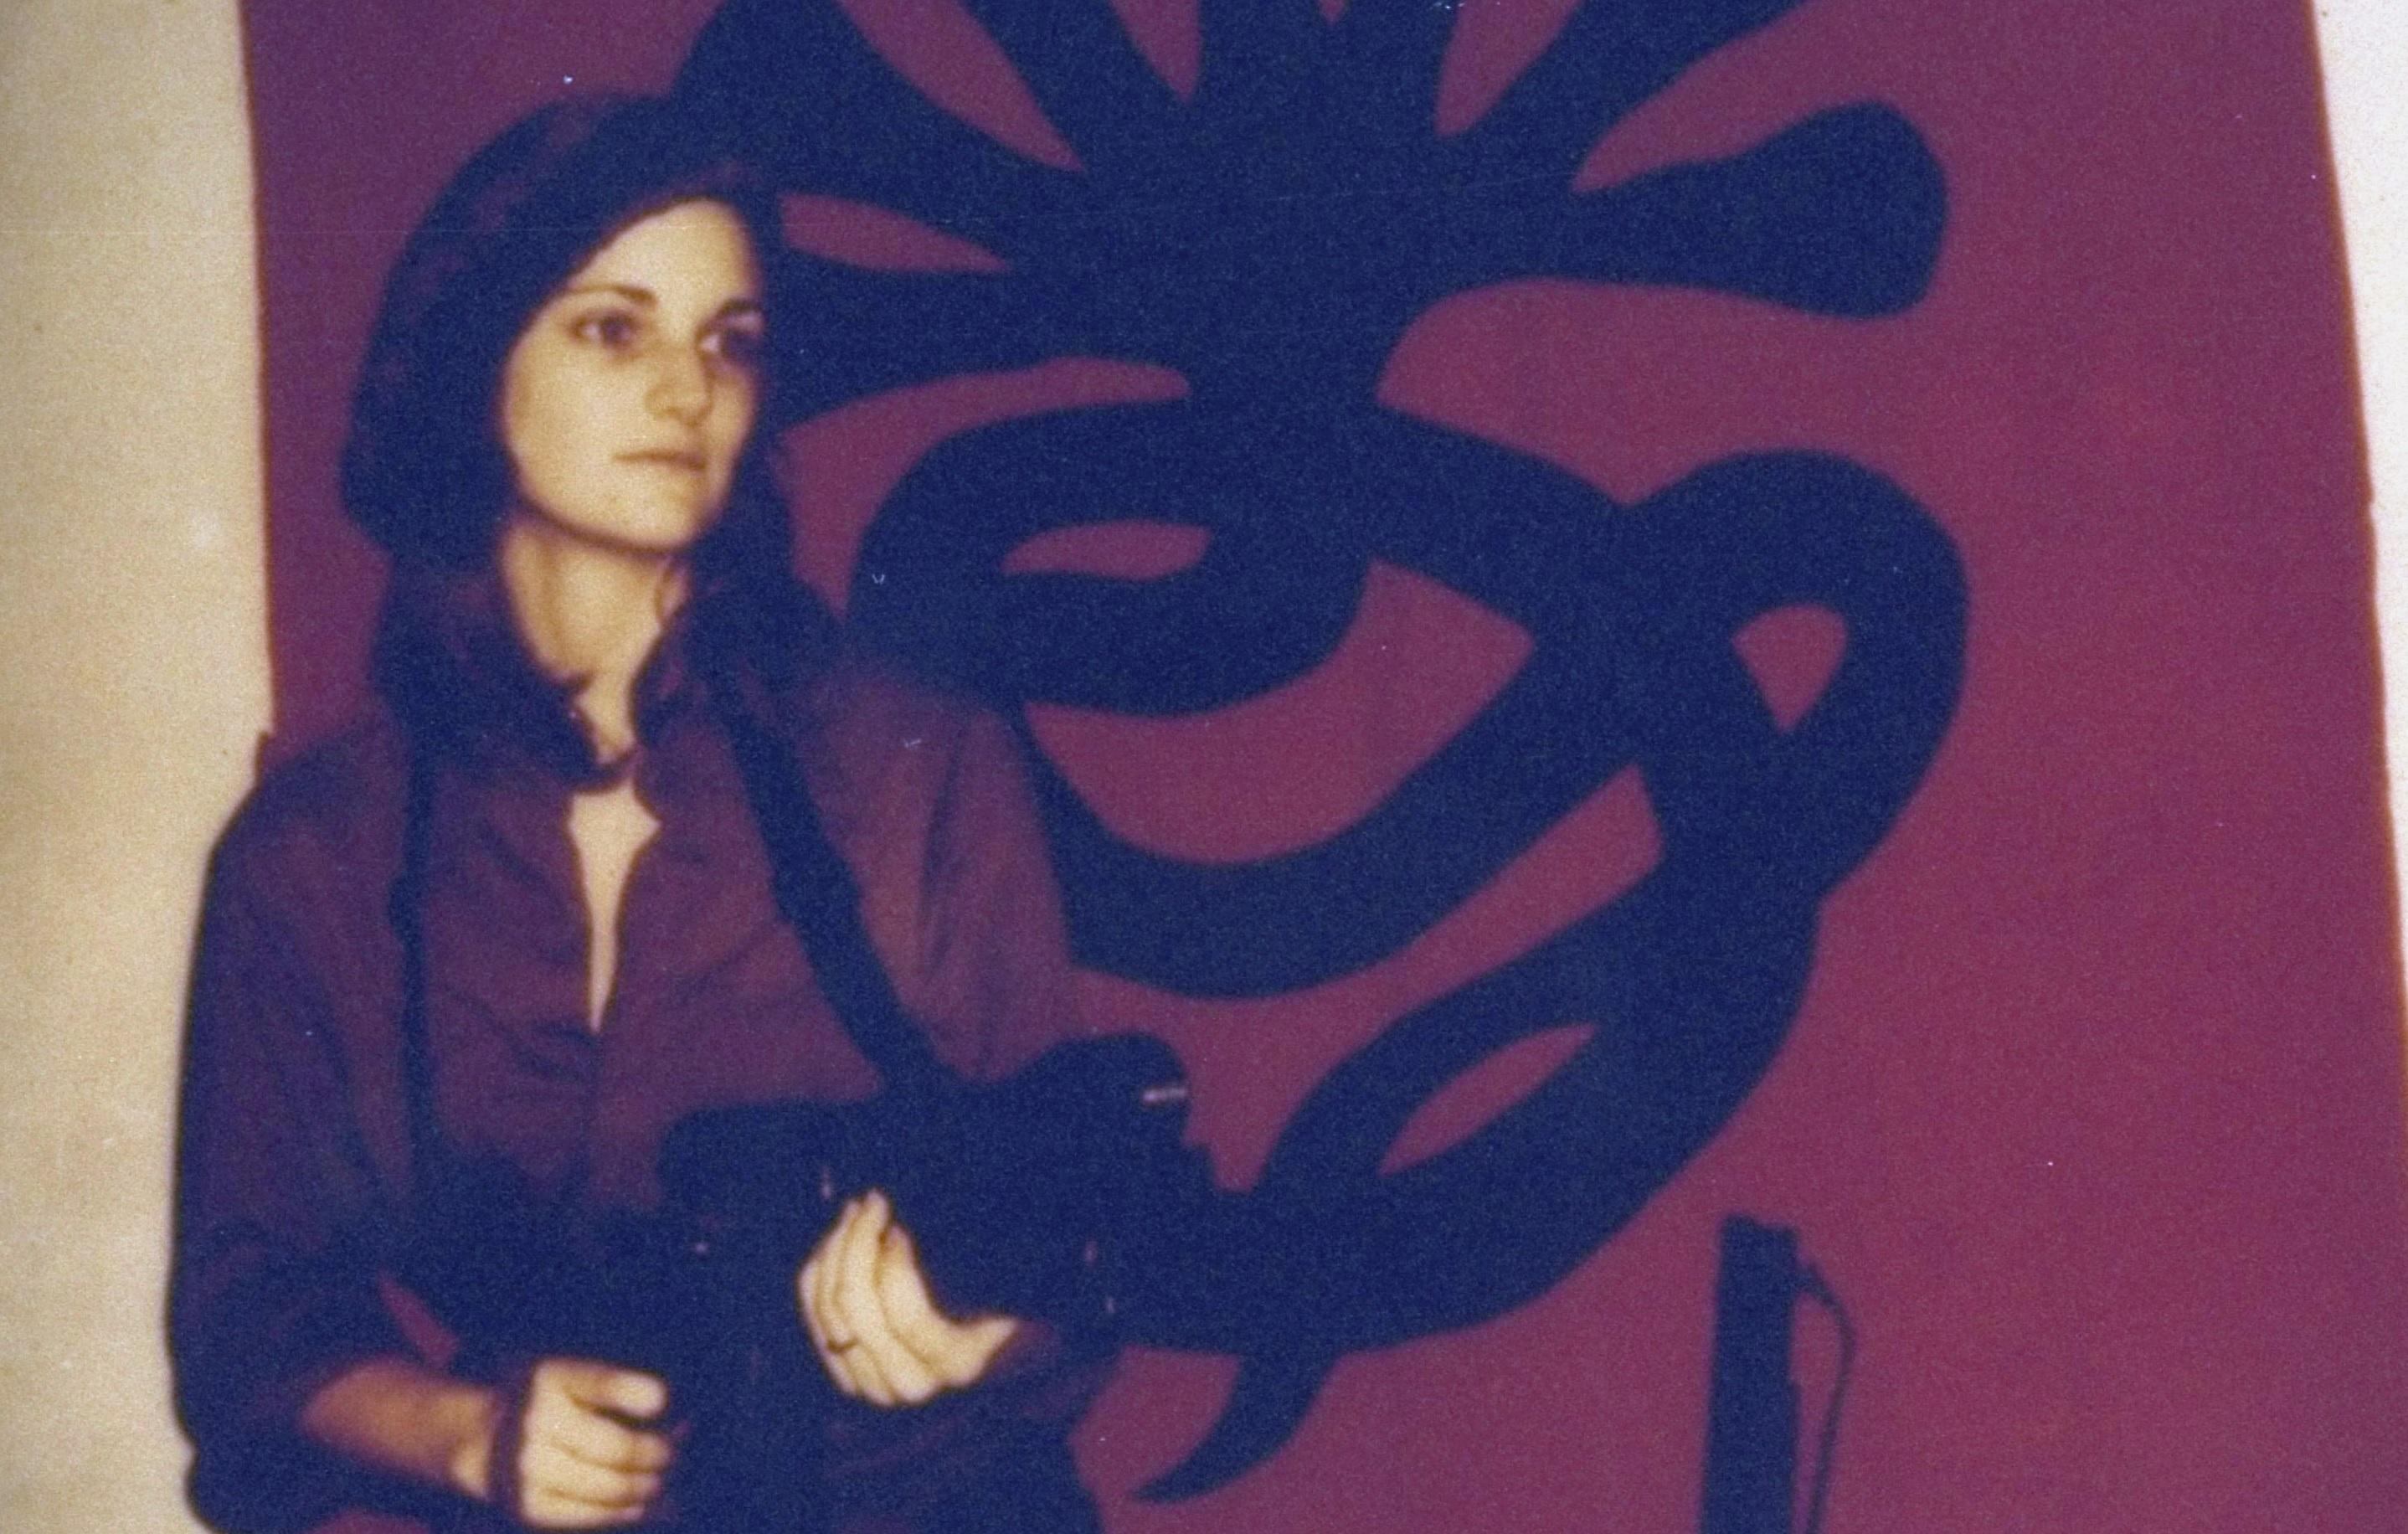 Newspaper Heiress Patty Hearst Was Kidnapped 50 Years Ago. Now She’s Famous for Her Dogs